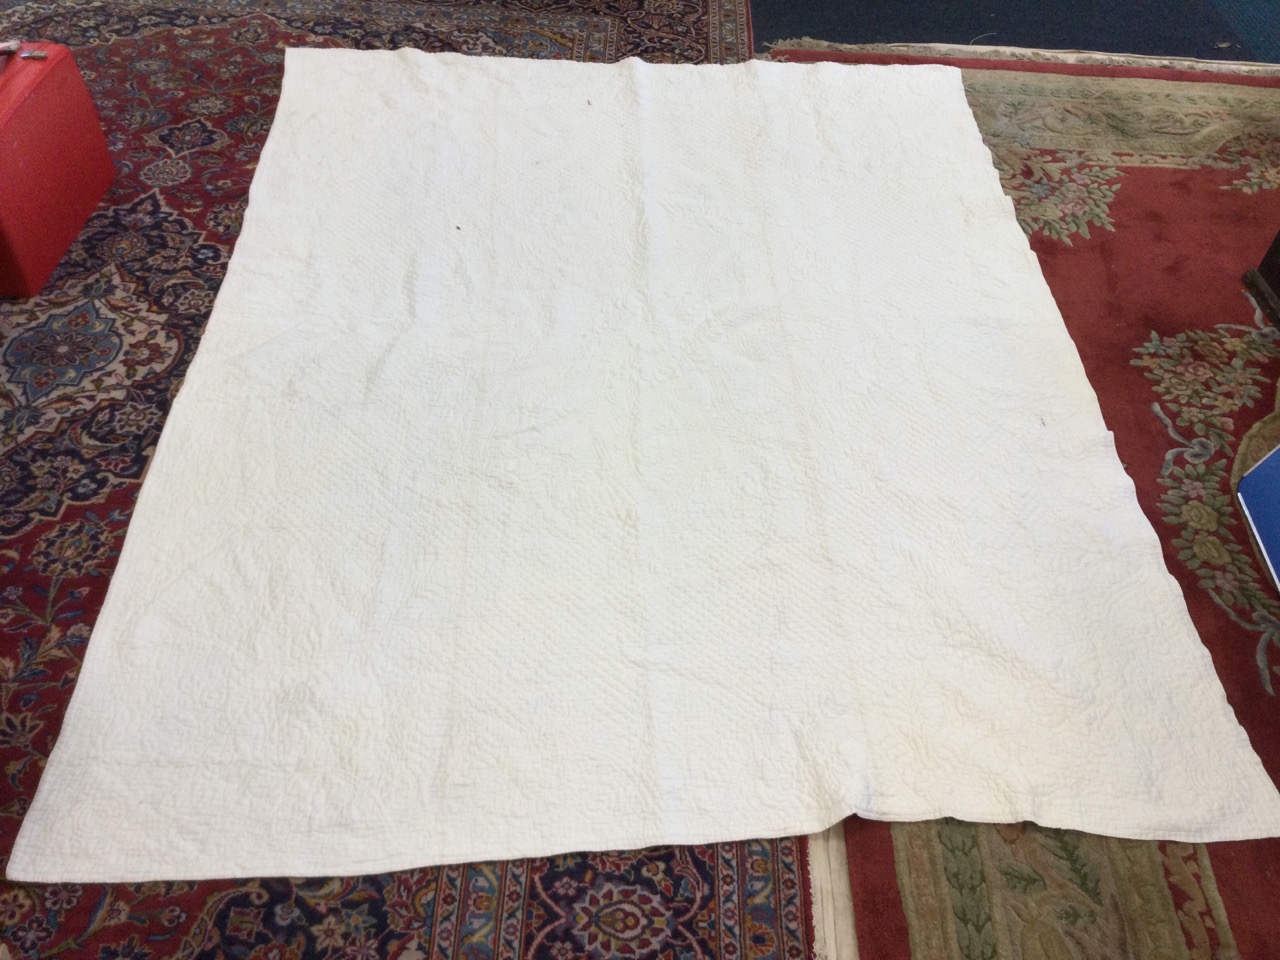 A large white cotton Durham quilt, hand-sewn in an embossed floral quilted pattern. (78in x 104in)